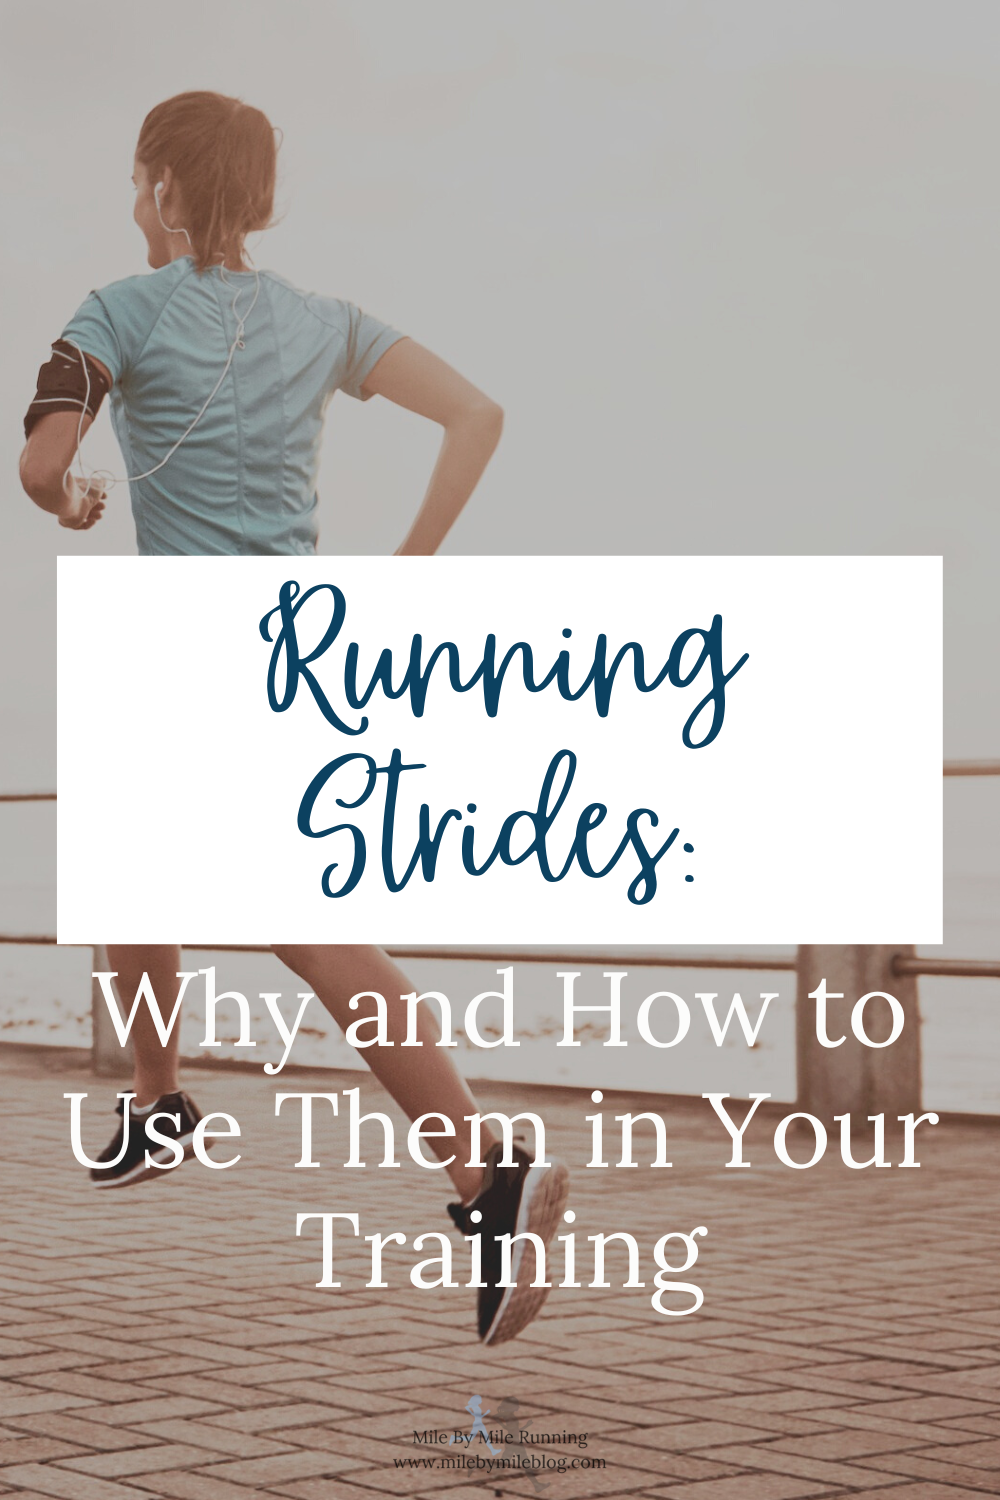 Running strides is a simple and effective way to improve your training that doesn't take much time. There are many benefits to running strides, and many ways they can be used. I have found them to be beneficial in almost every phase of training.